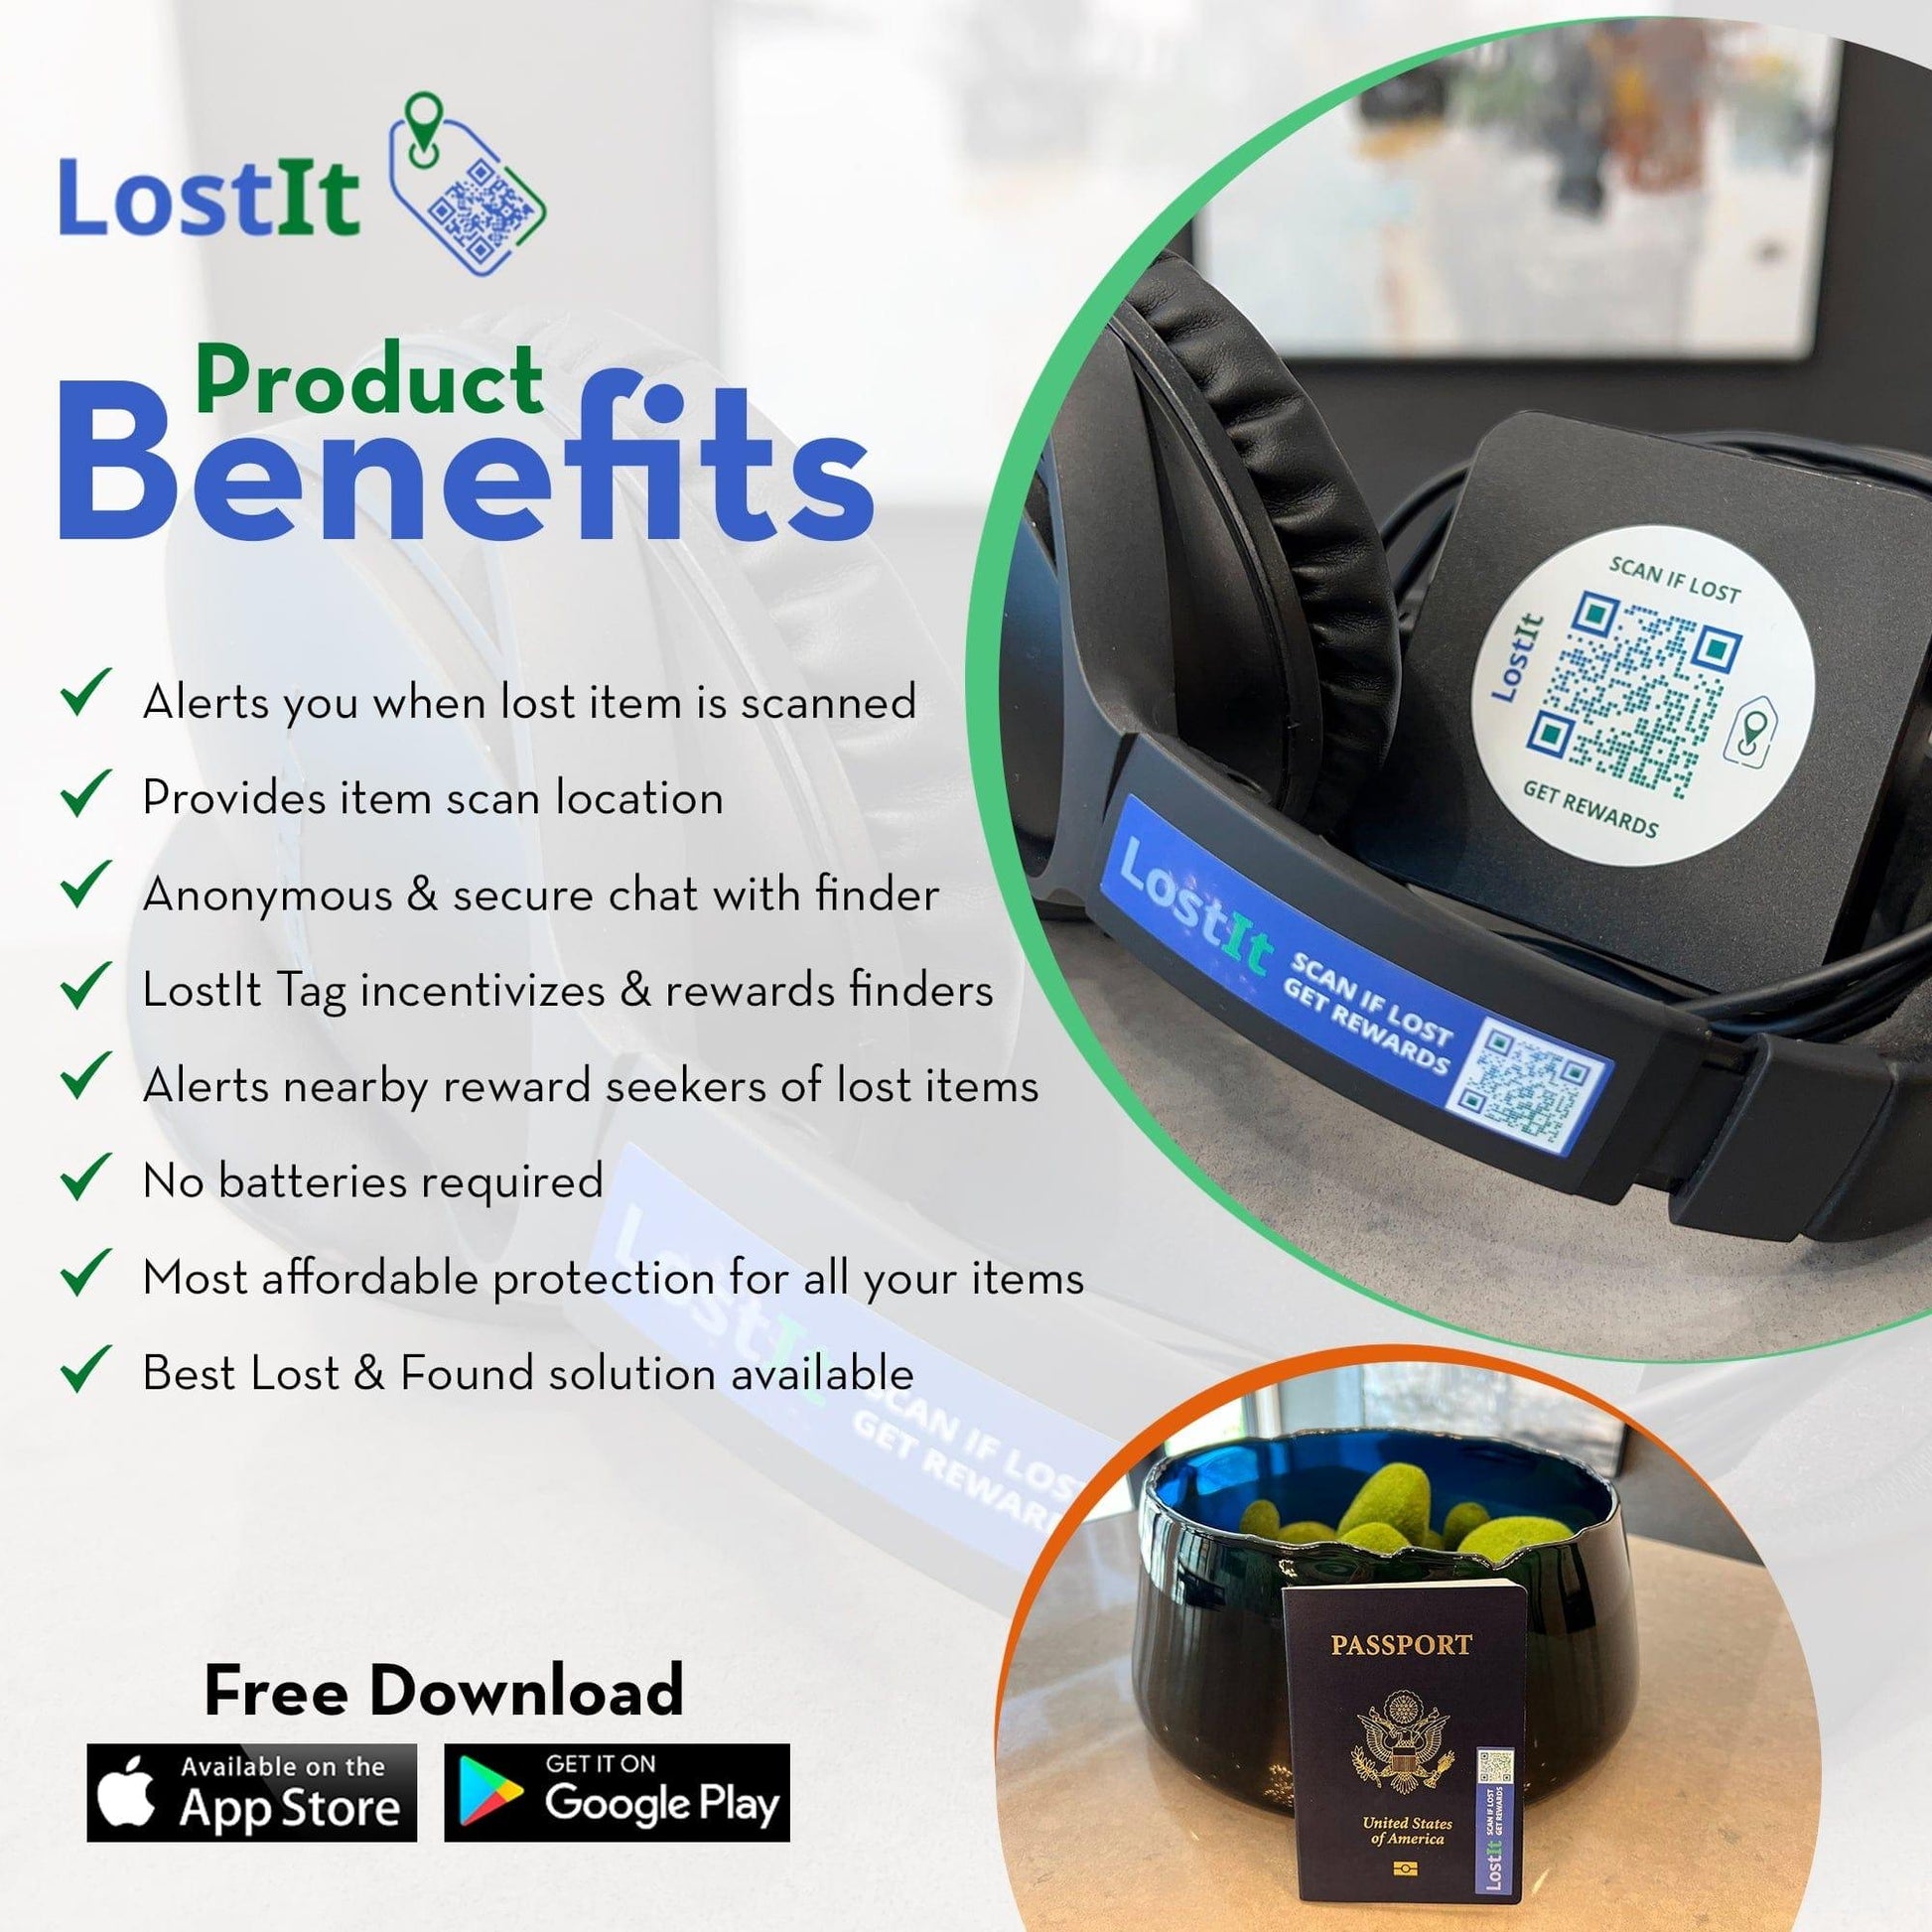 LostIt Tag product Benefits. Alerts you when a lost item is scanned. Provides item scan location. Anonymous and secure chat with finder. LostIt Tag incentivizes and rewards finders—alerts nearby reward seekers of lost items. No batteries are required. Most affordable protection for all your items. Best Lost and Found solution available.